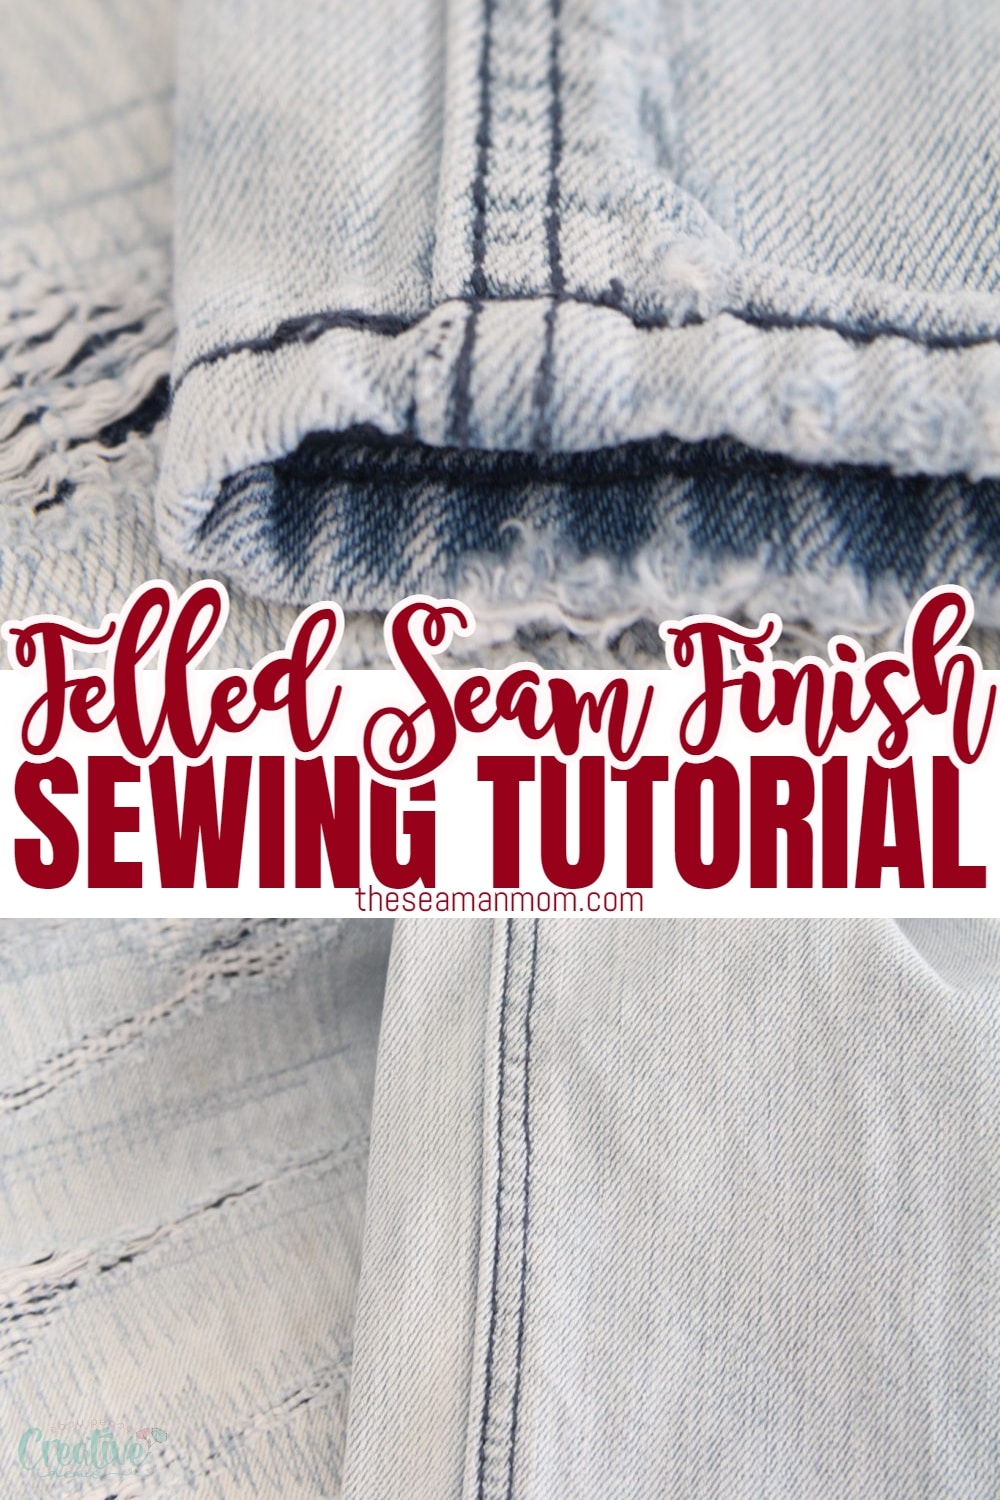 Add a more polished finish to your handmade jeans or bags with the use of a Flat Fell Seam! This particular seam technique, also known as Denim Seam and Felled Seam, will not only give your pieces an extra layer of protection but make them look professionally done. Use it to upgrade the overall quality and durability of all your fashion projects today! via @petroneagu